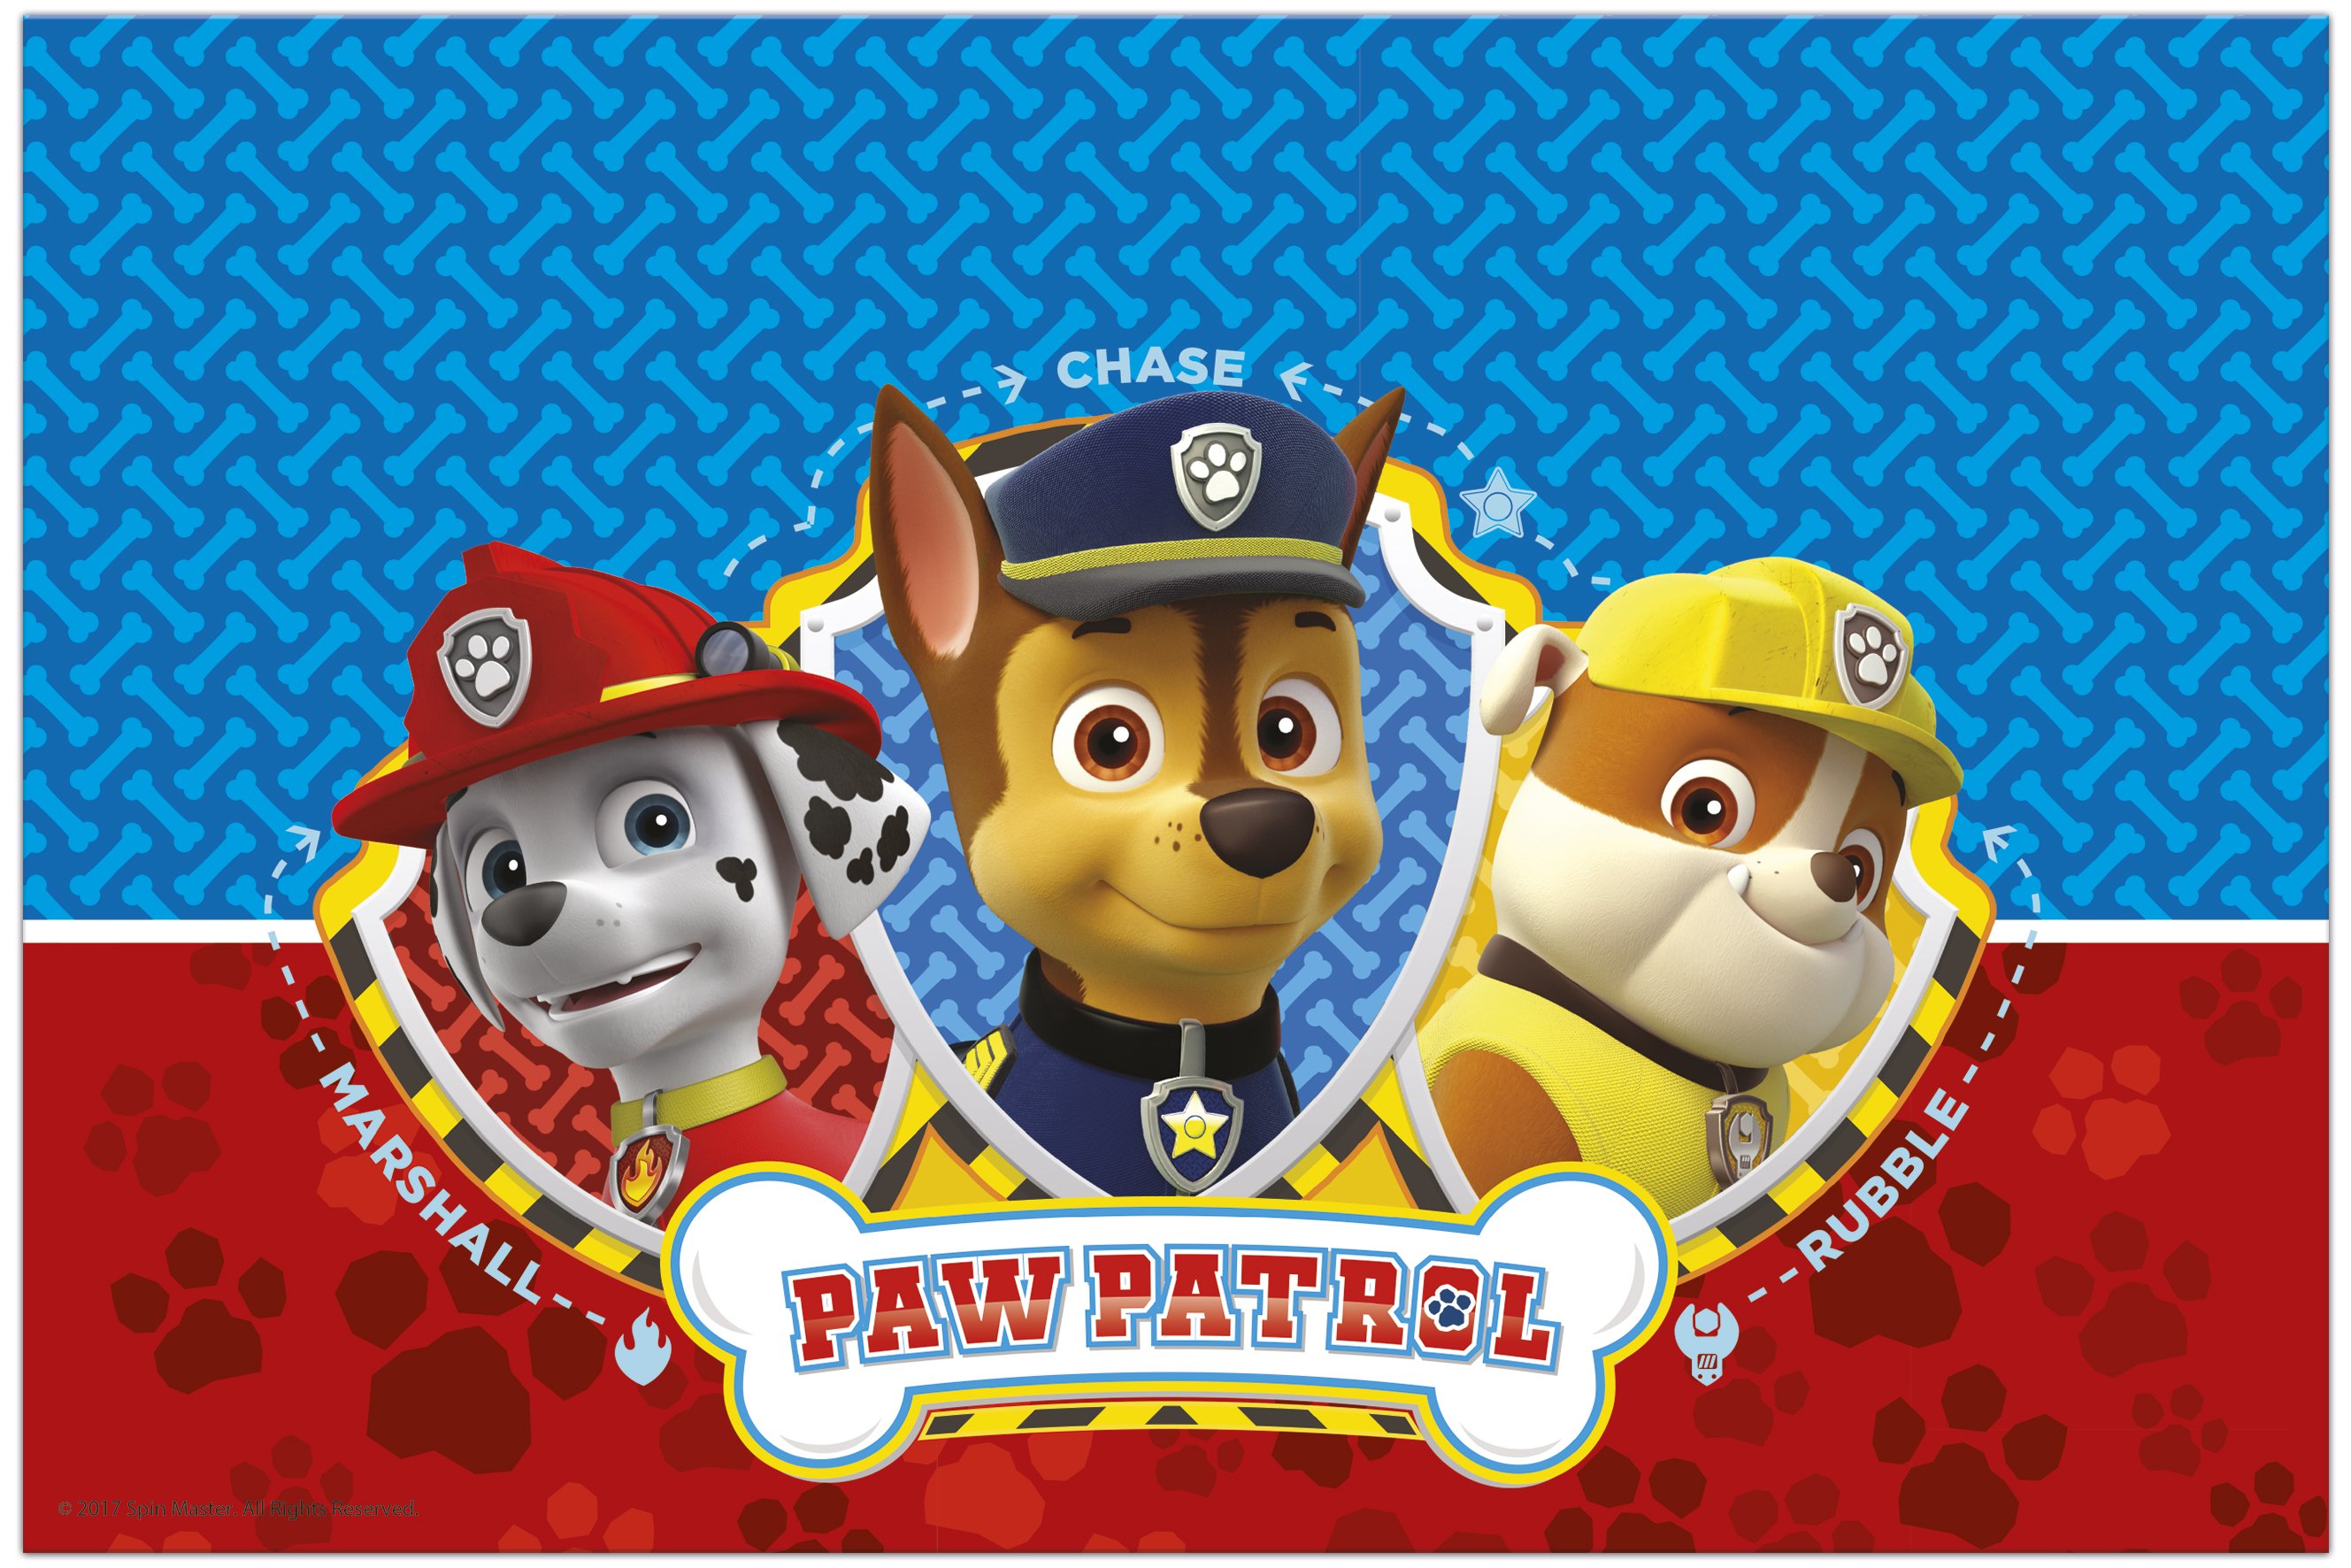 Plastic table cloth, Paw Patrol ready for action 120 x 180 cm